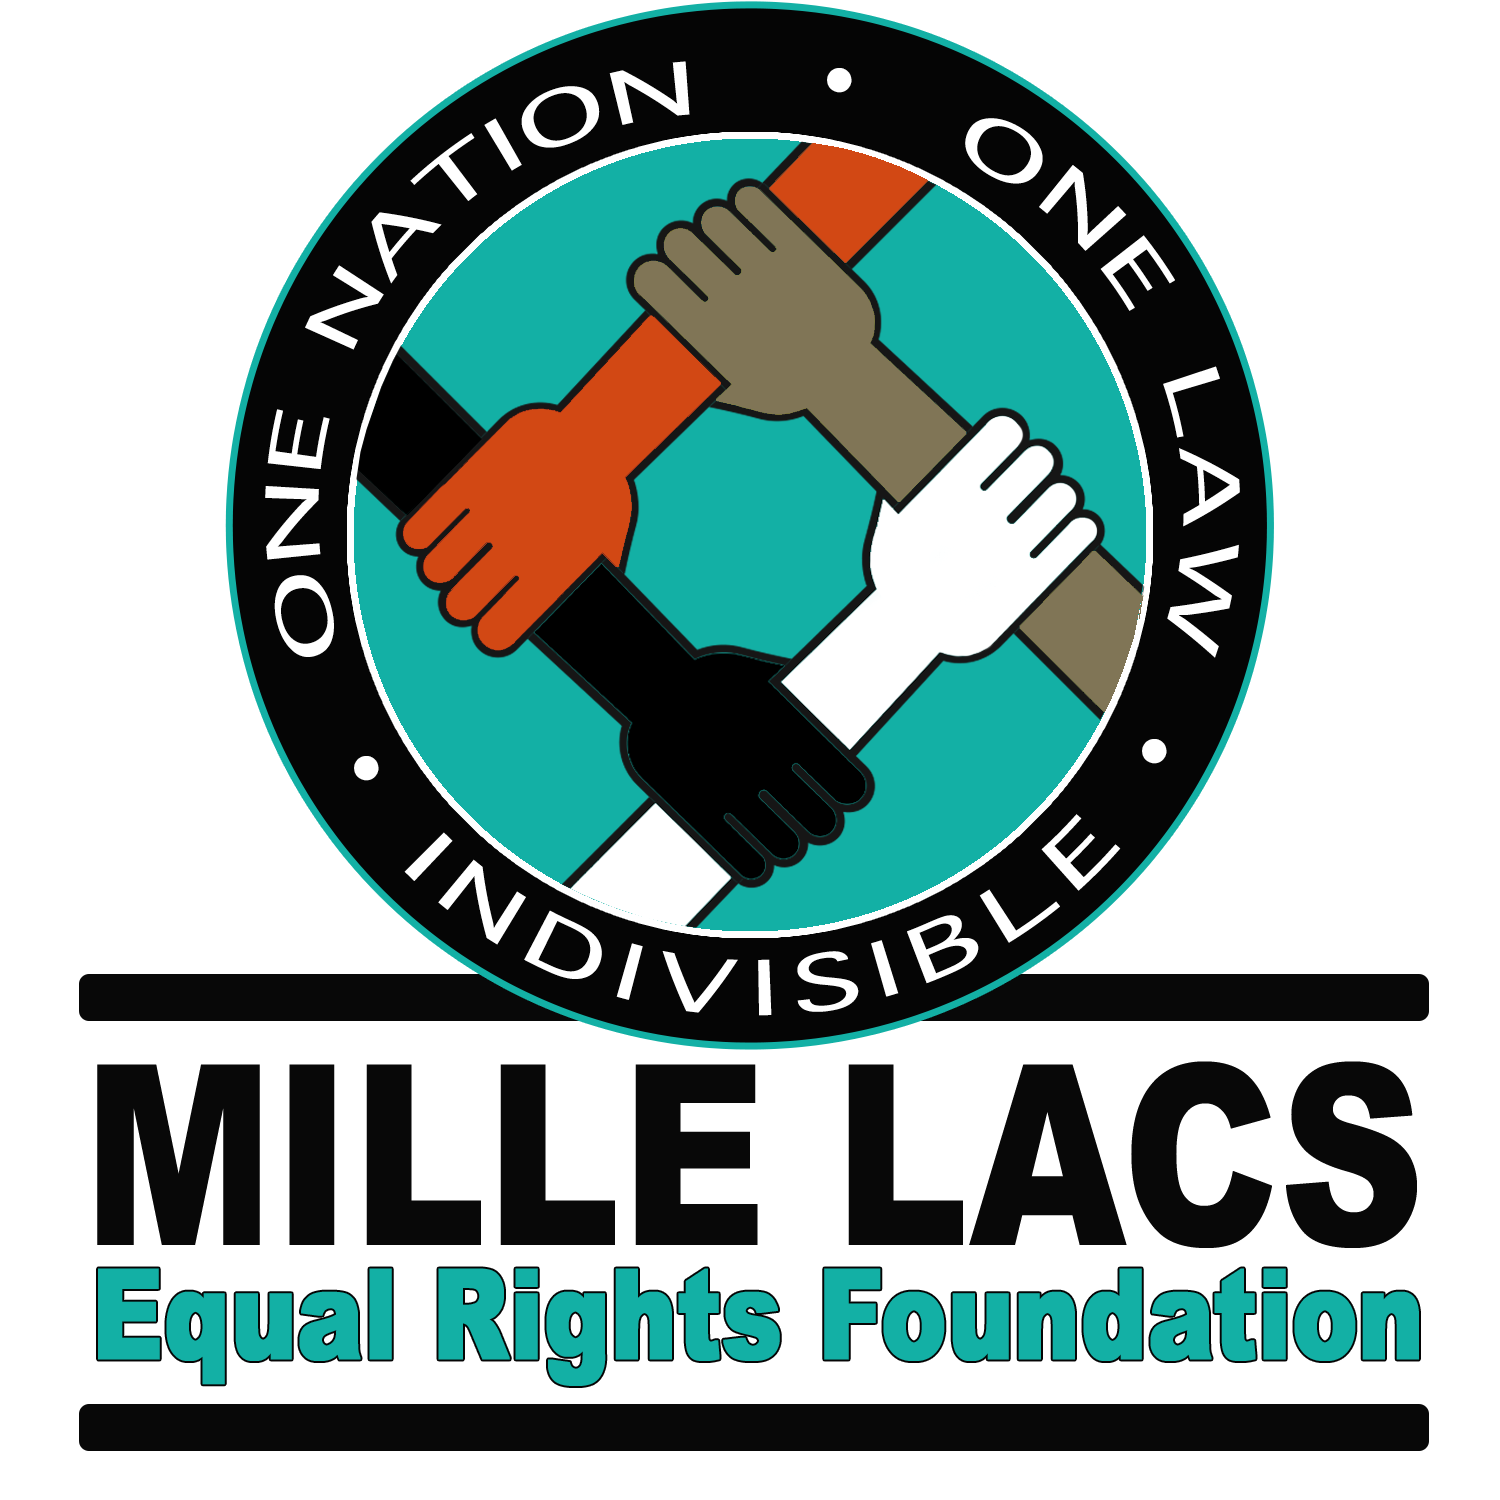 Mille Lacs Equal Rights Foundation